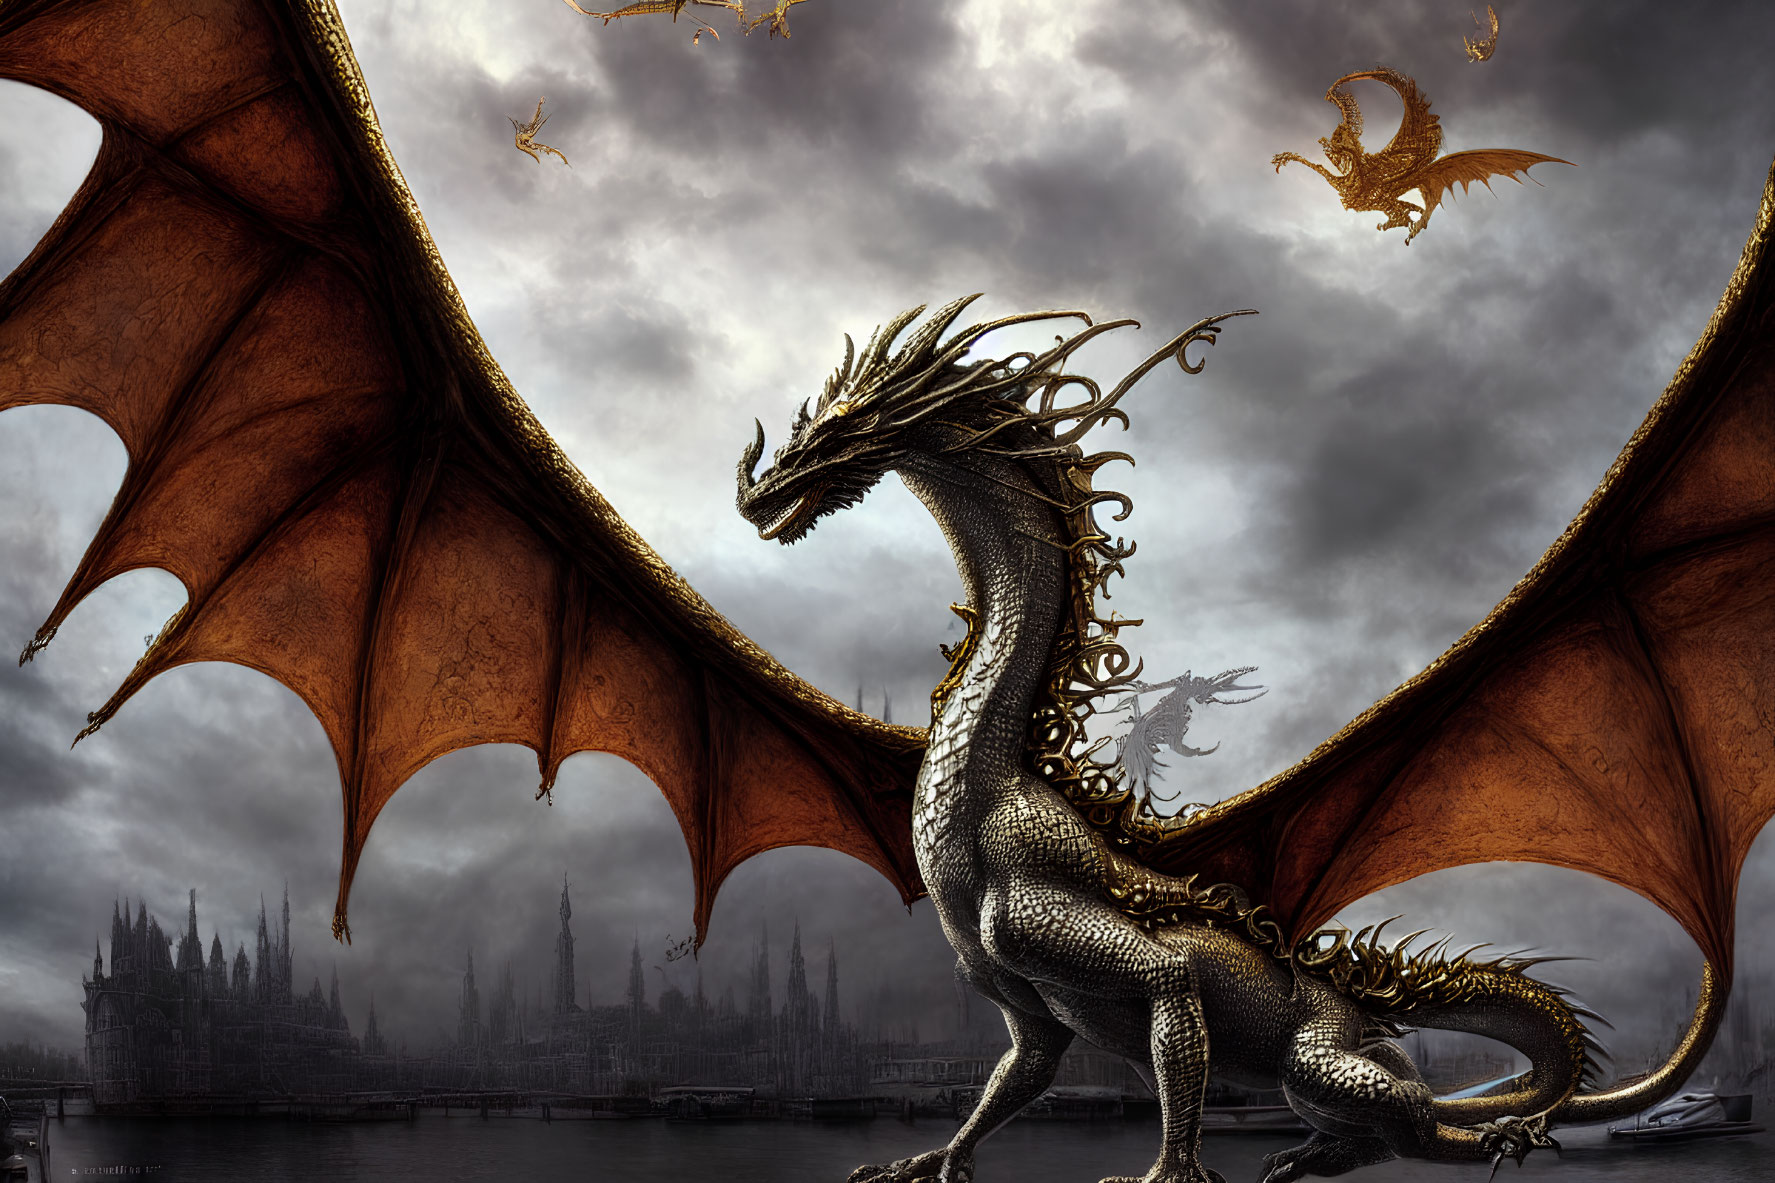 Silver dragon with expansive wings against brooding sky and castle, with smaller dragons.